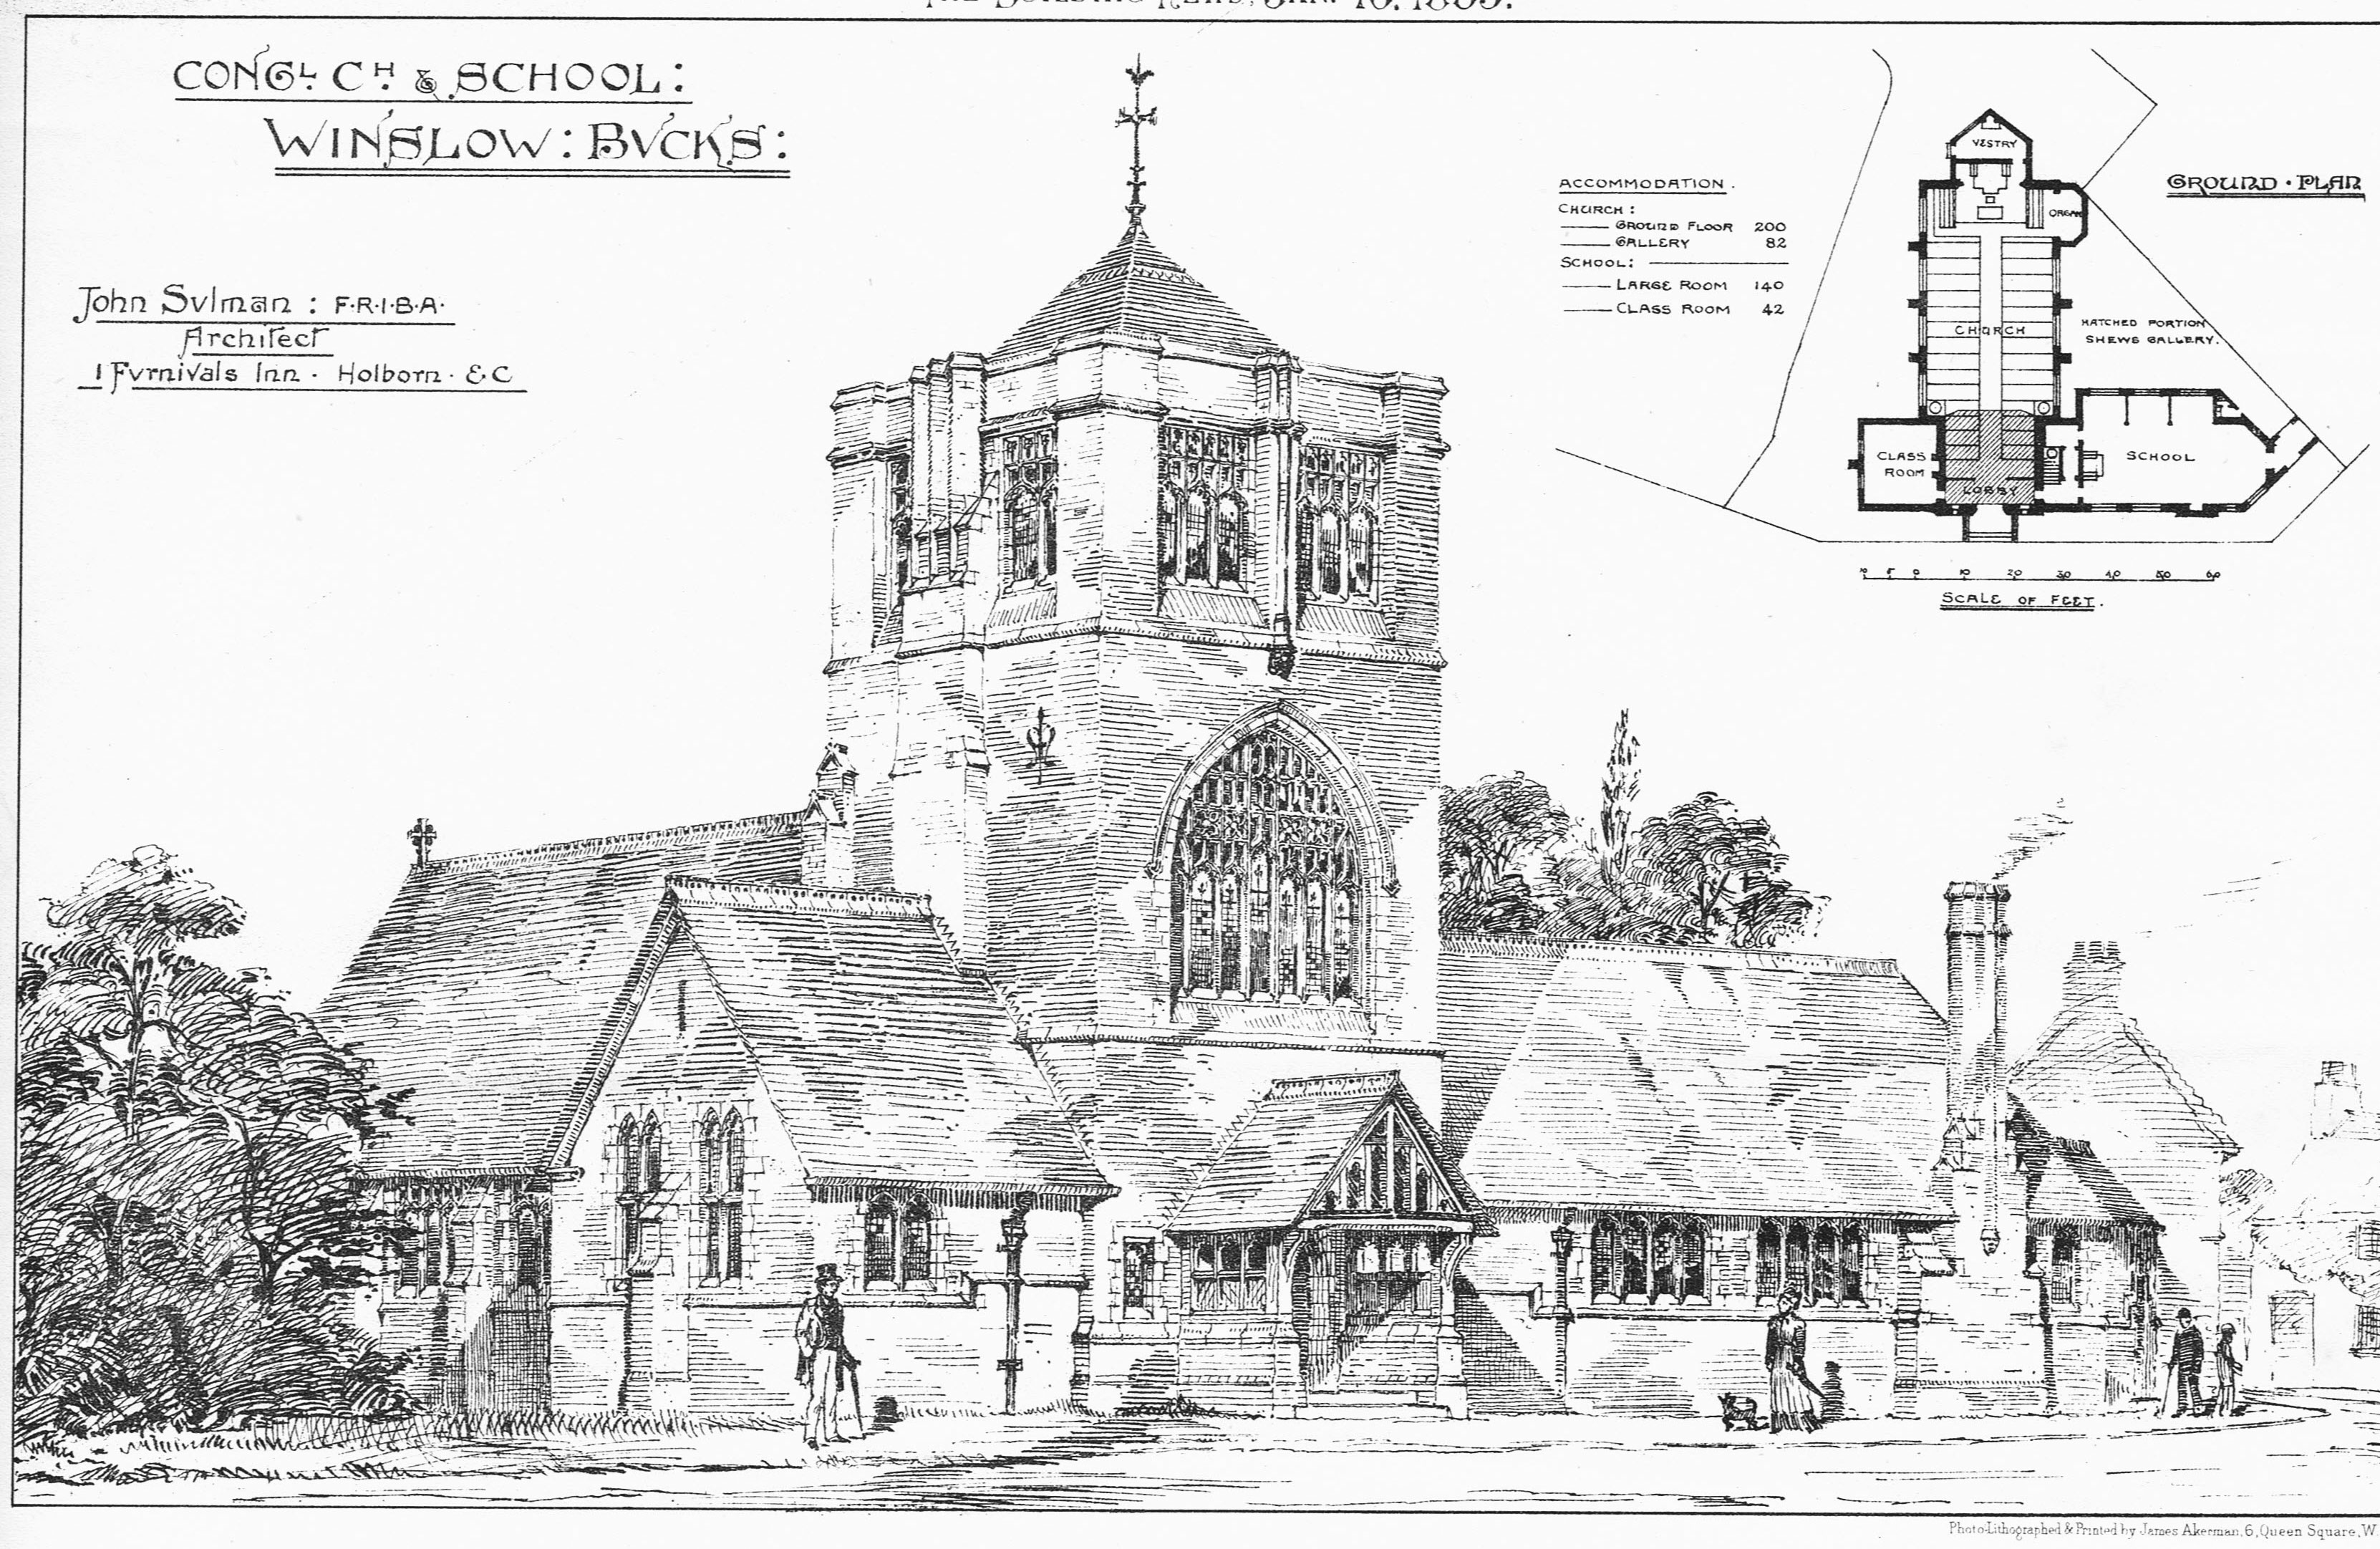 Drawing and plan of the Congregational Church